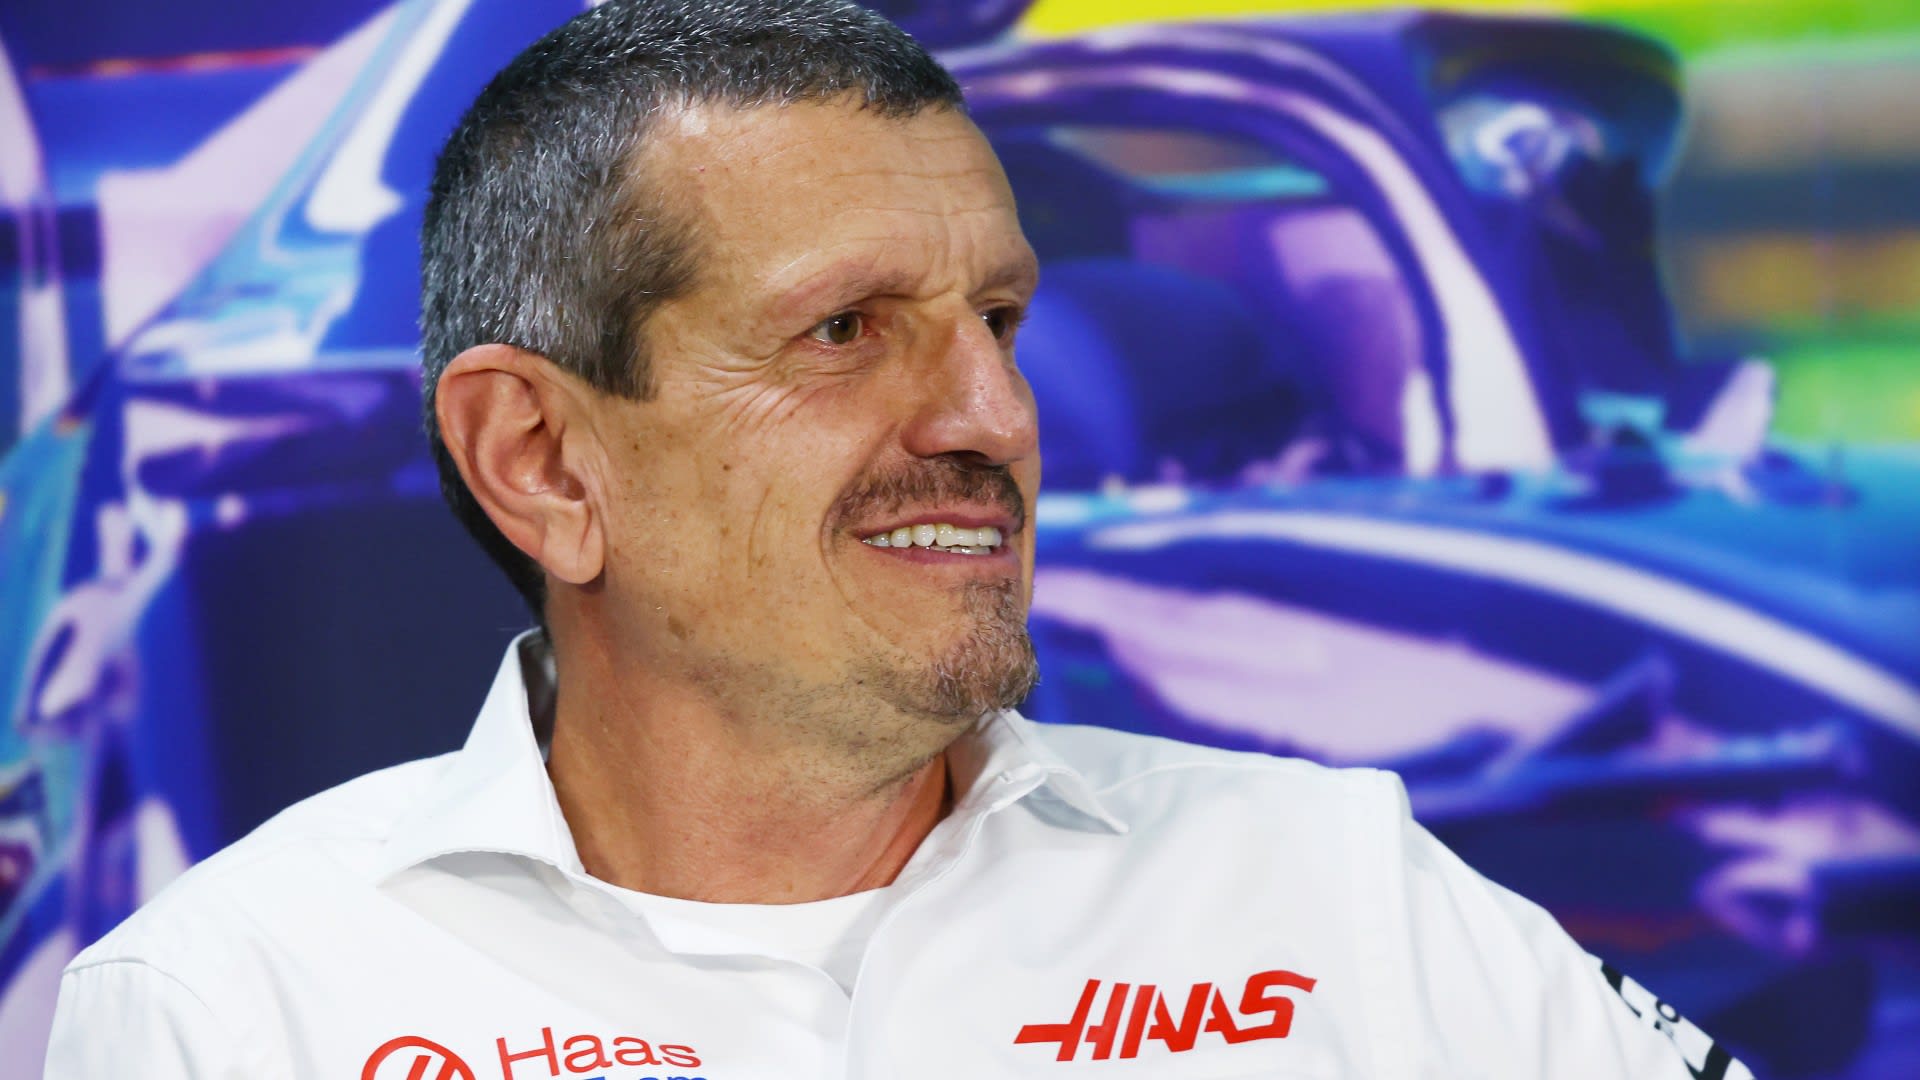 Steiner confirms Haas will announce decision on 2023 line-up ahead of Abu Dhabi season finale - Formula 1